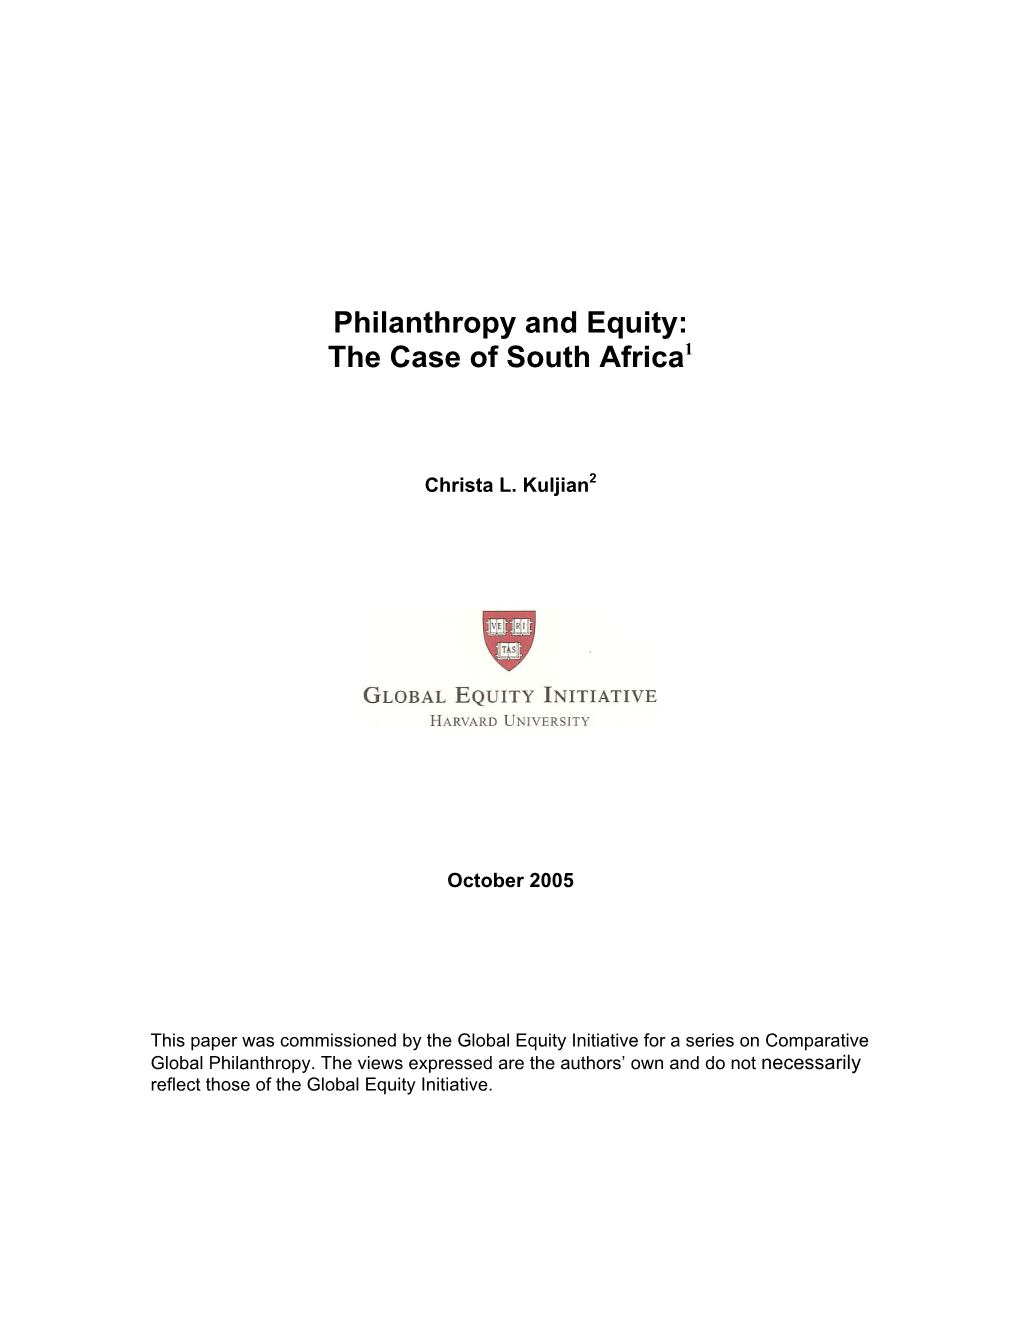 Philanthropy and Equity: the Case of South Africa1